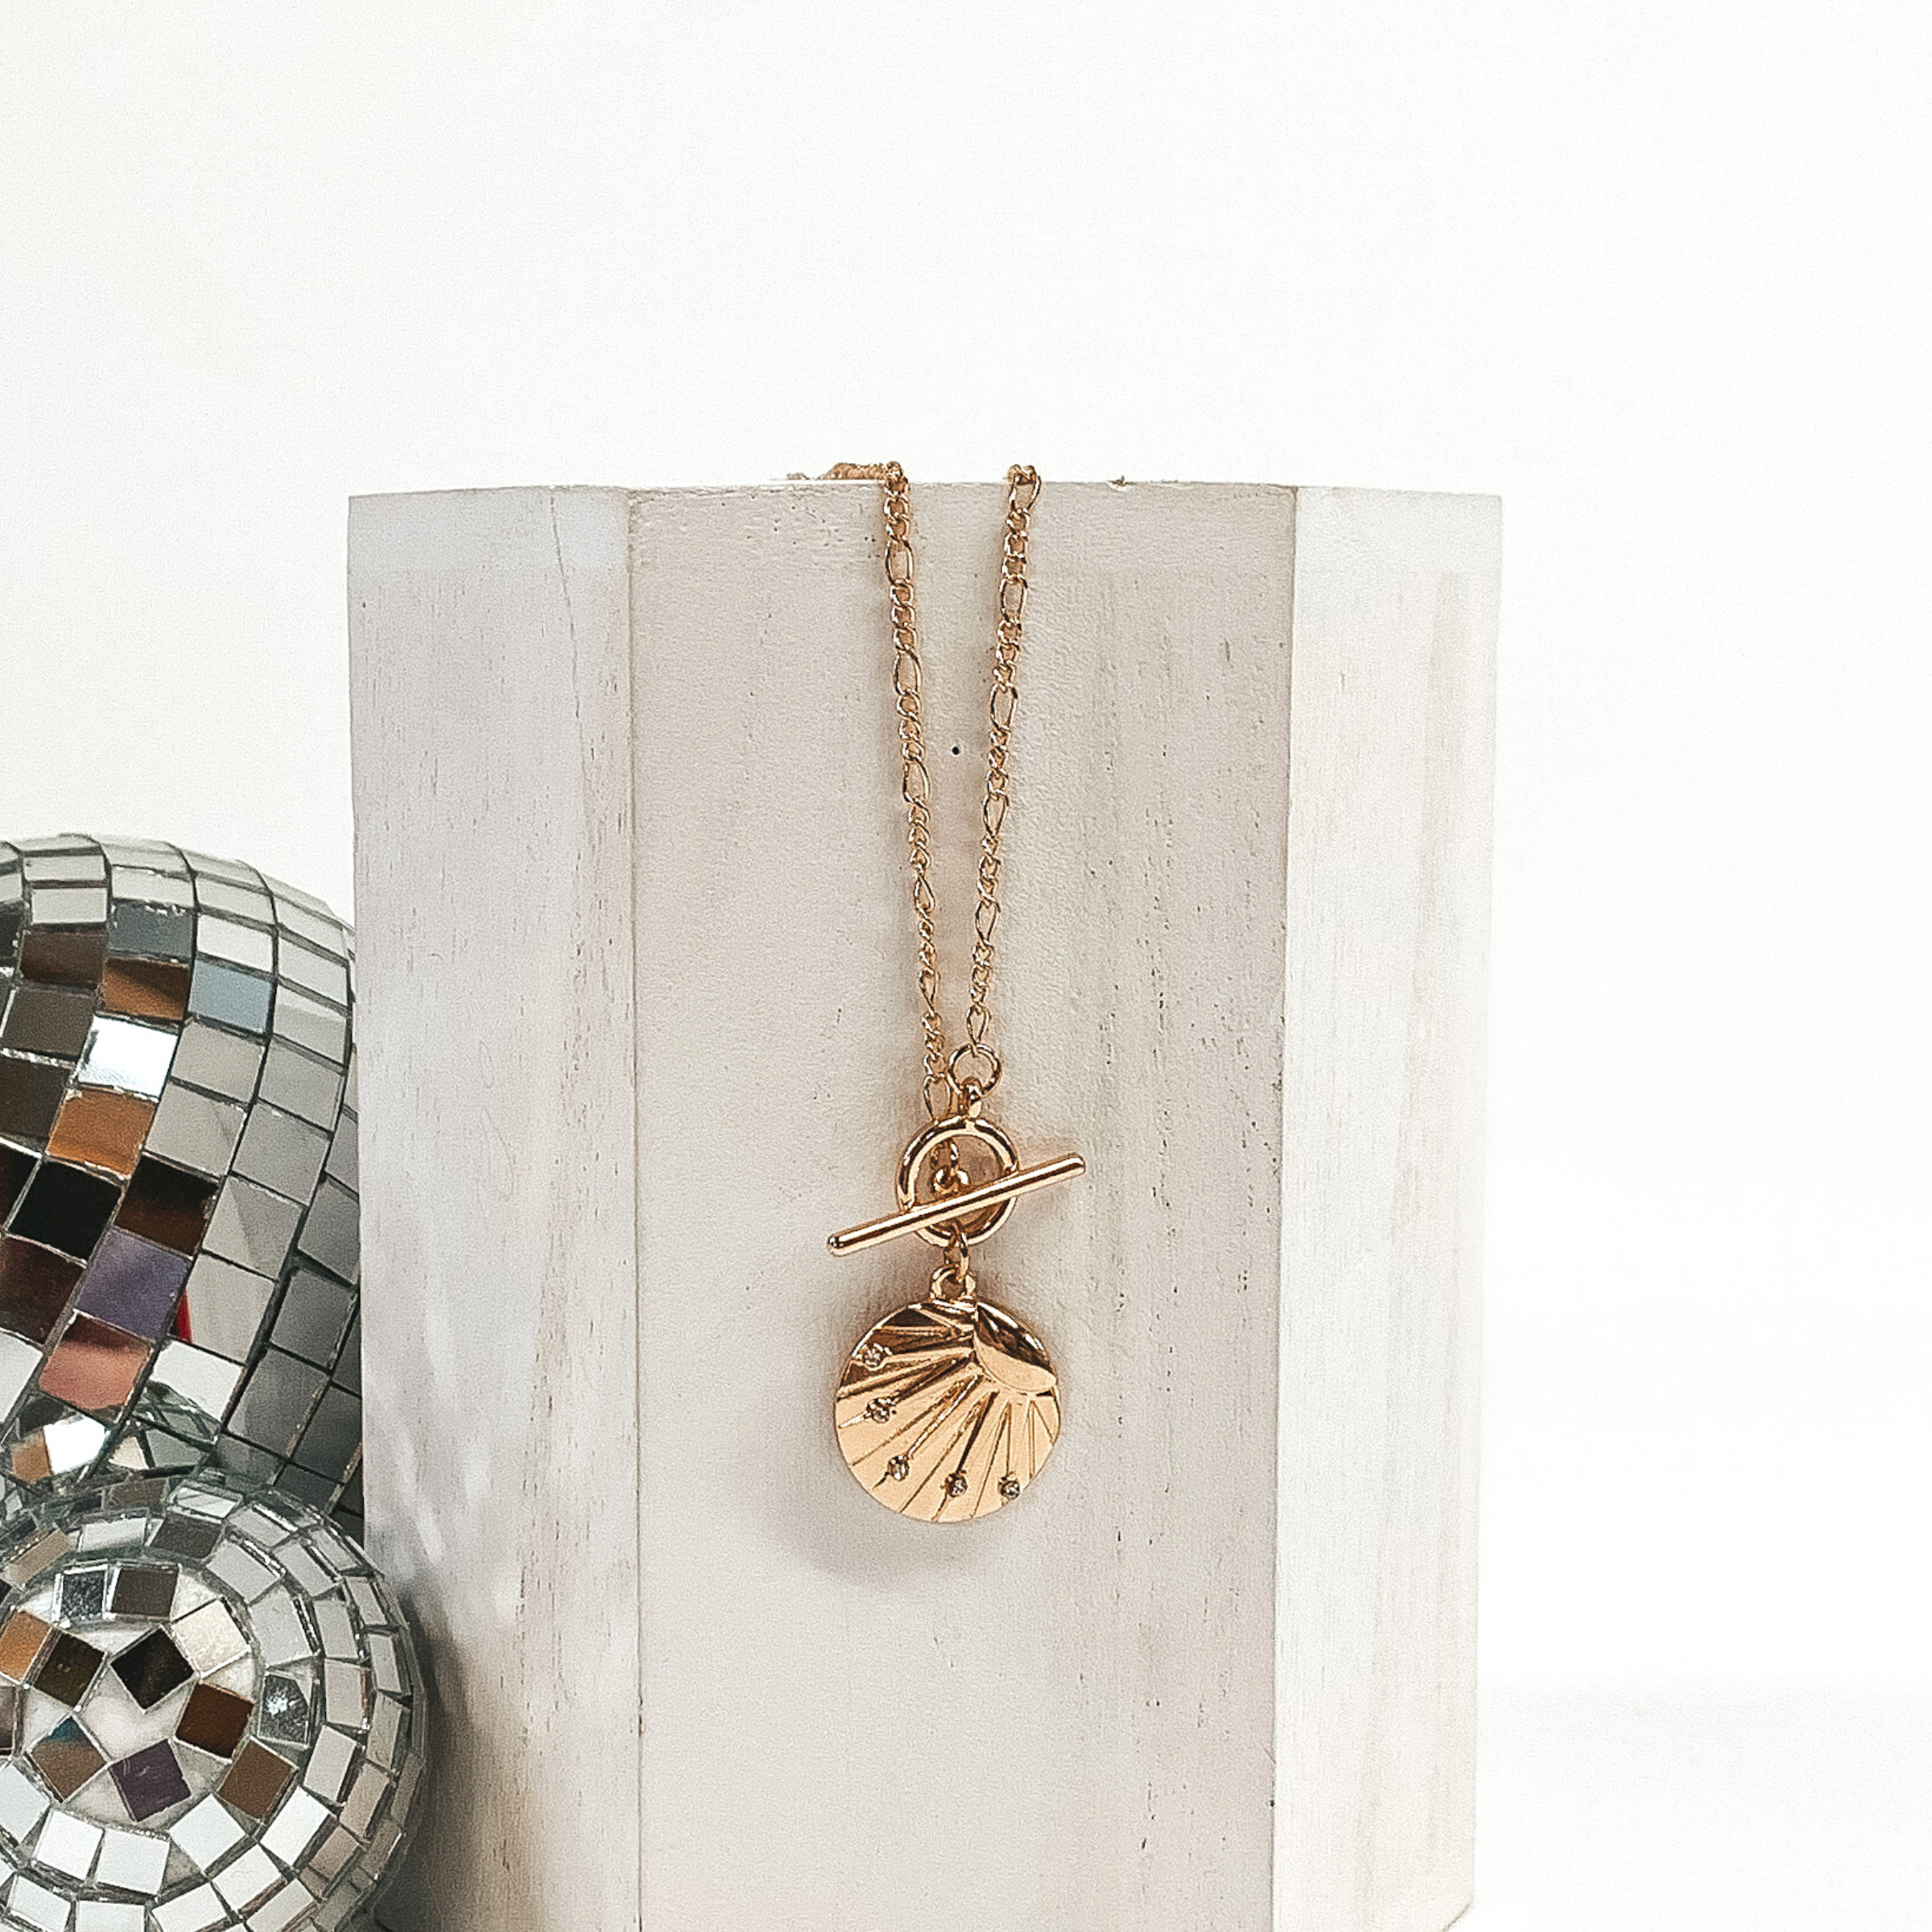 This is a gold necklace with a shell textured circle pendant with a sun design on it with a front toggle clasp. This necklace is pictured laying on a white block and on a white background with disco balls on the left side of the block.